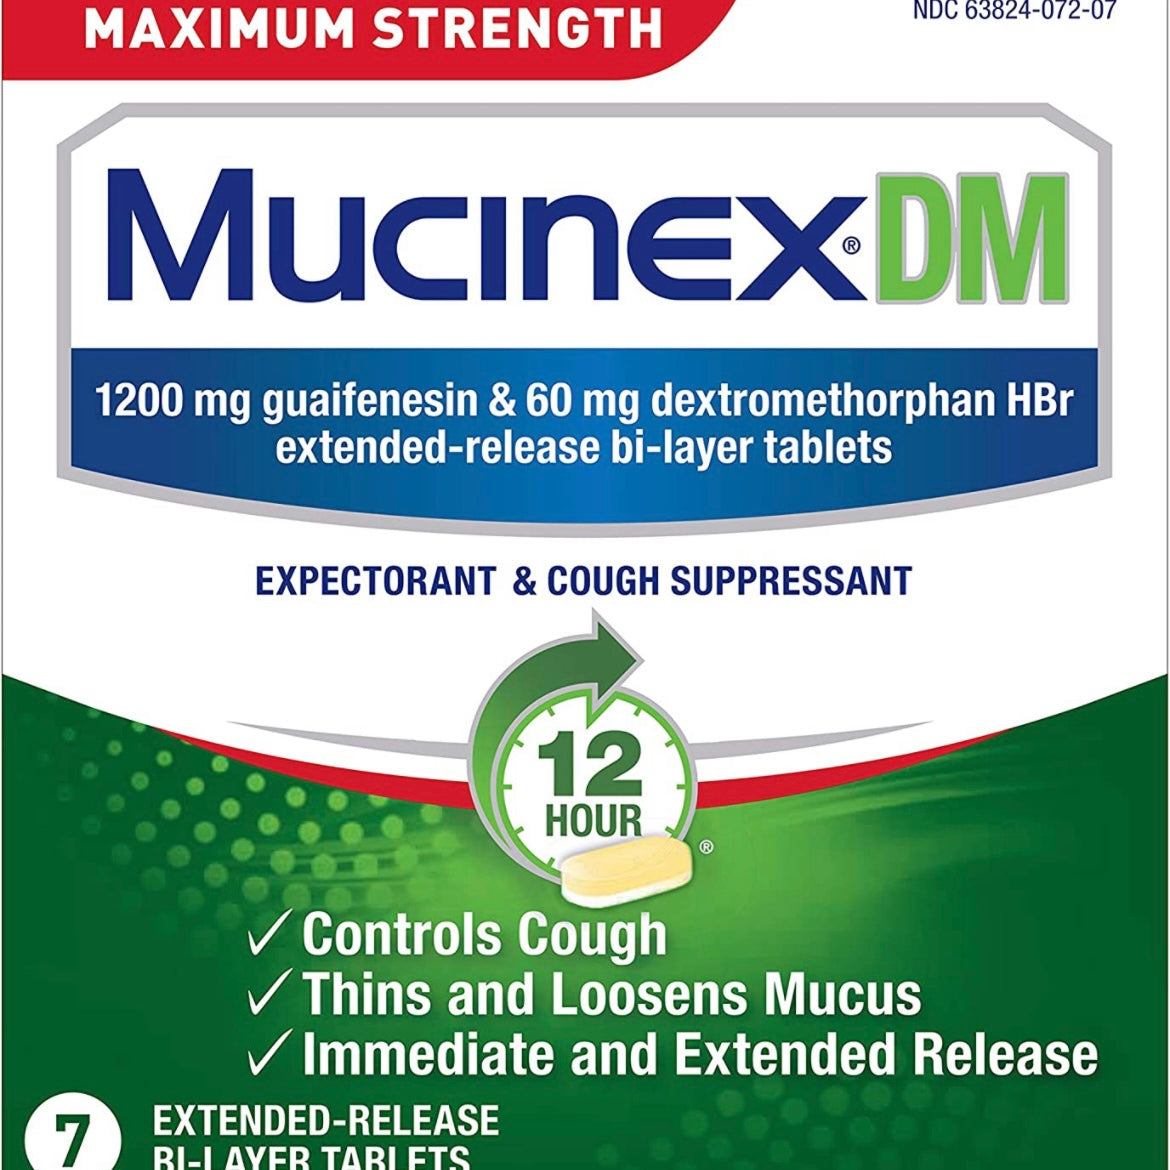 Cough Suppressant and Expectorant, Mucinex DM Maximum Strength 12 Hour Tablets, 7ct